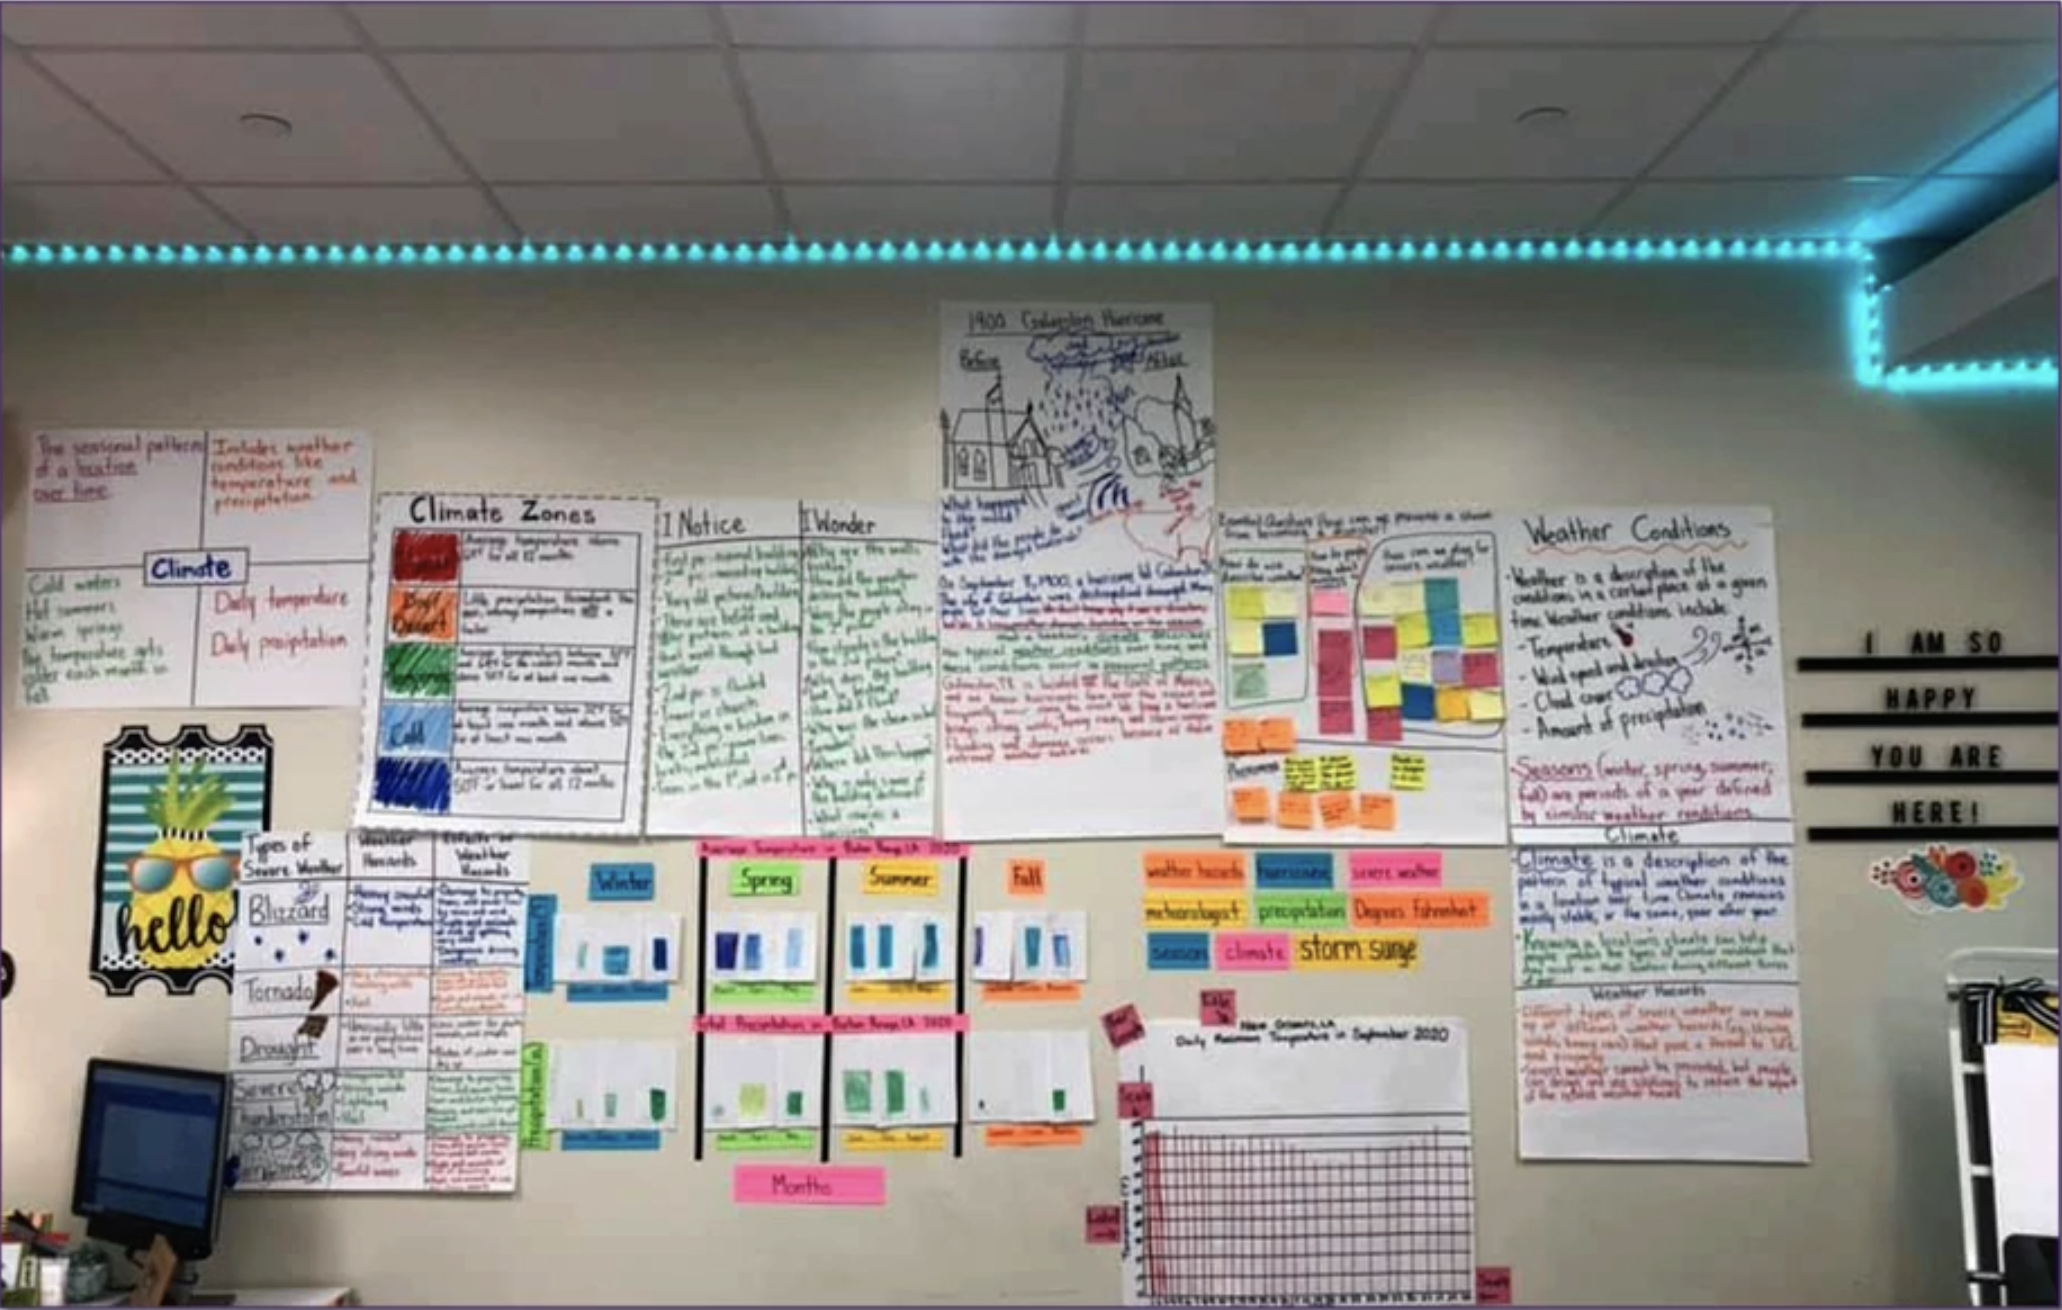 An example of a wall from a PhD Science classroom that includes charts, anchor visuals, and a word wall